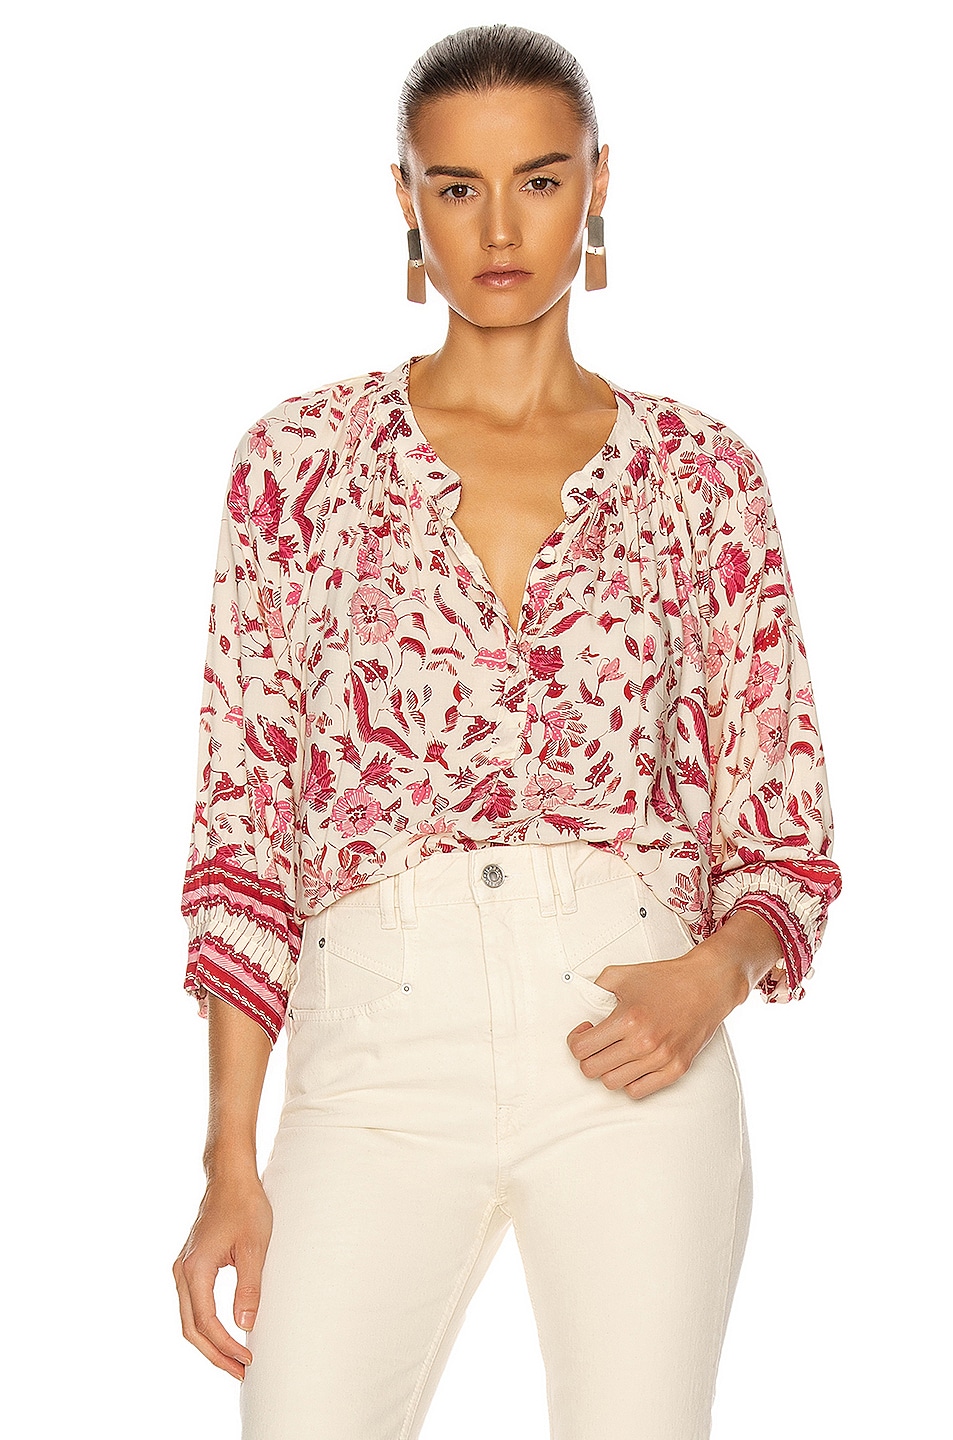 Image 1 of Natalie Martin Remy Top in Wildflower Rose